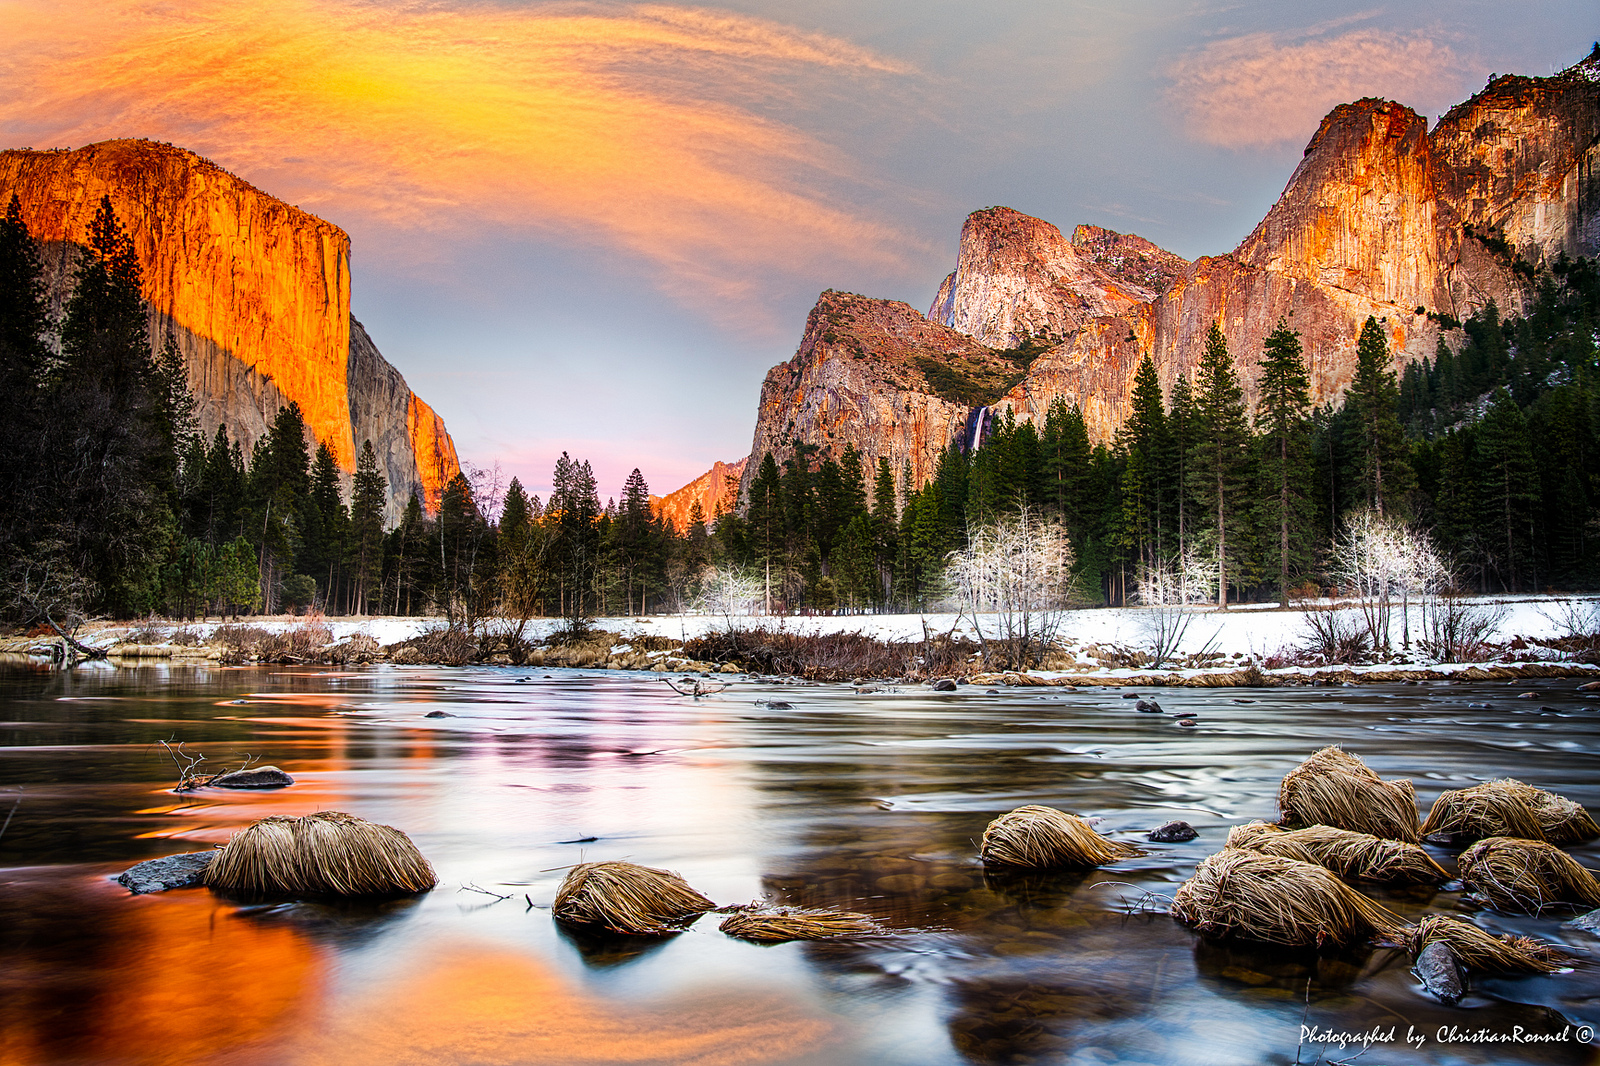 The Most Beautiful National Parks In The World